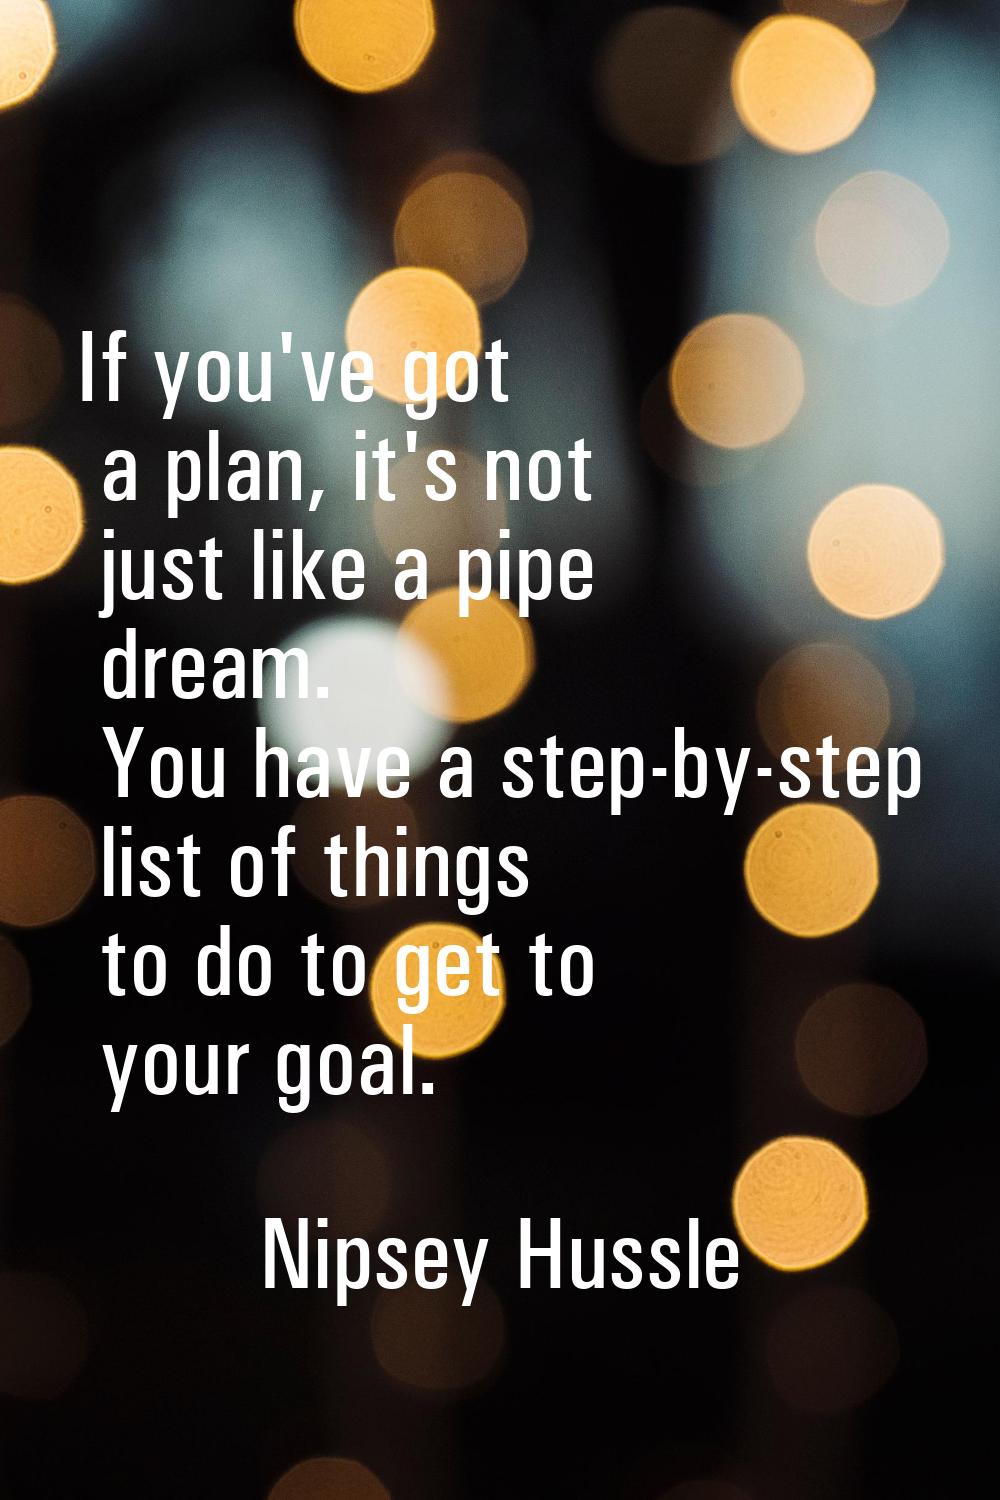 If you've got a plan, it's not just like a pipe dream. You have a step-by-step list of things to do